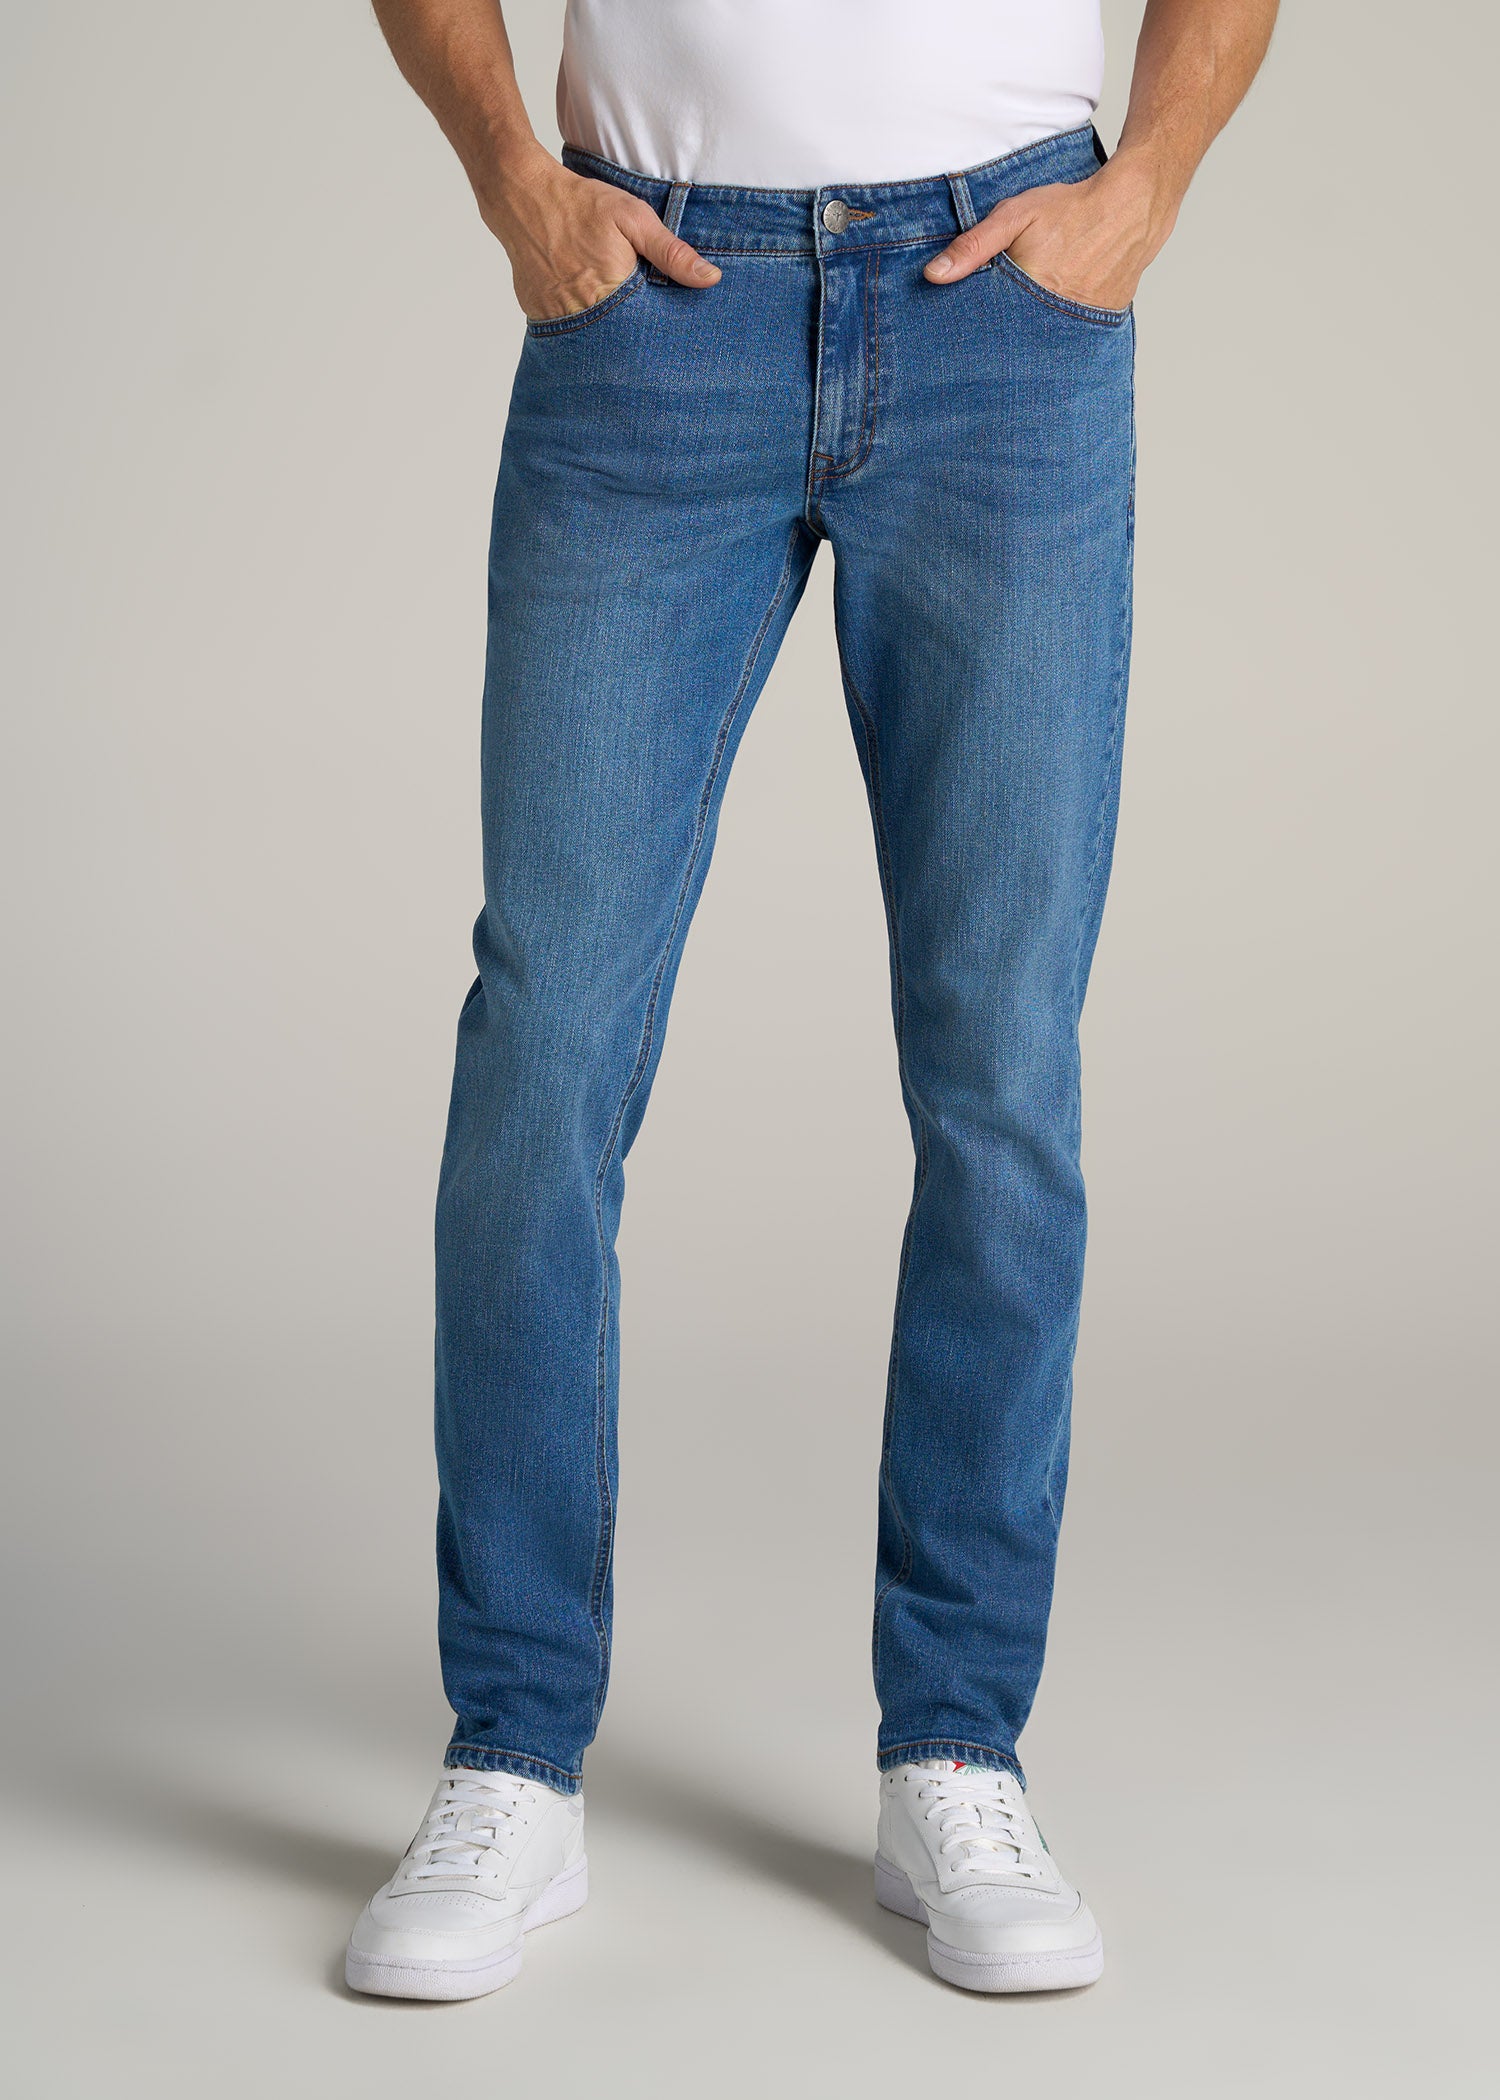 Carman Tapered Jeans For Tall Men Classic Mid Blue | American Tall